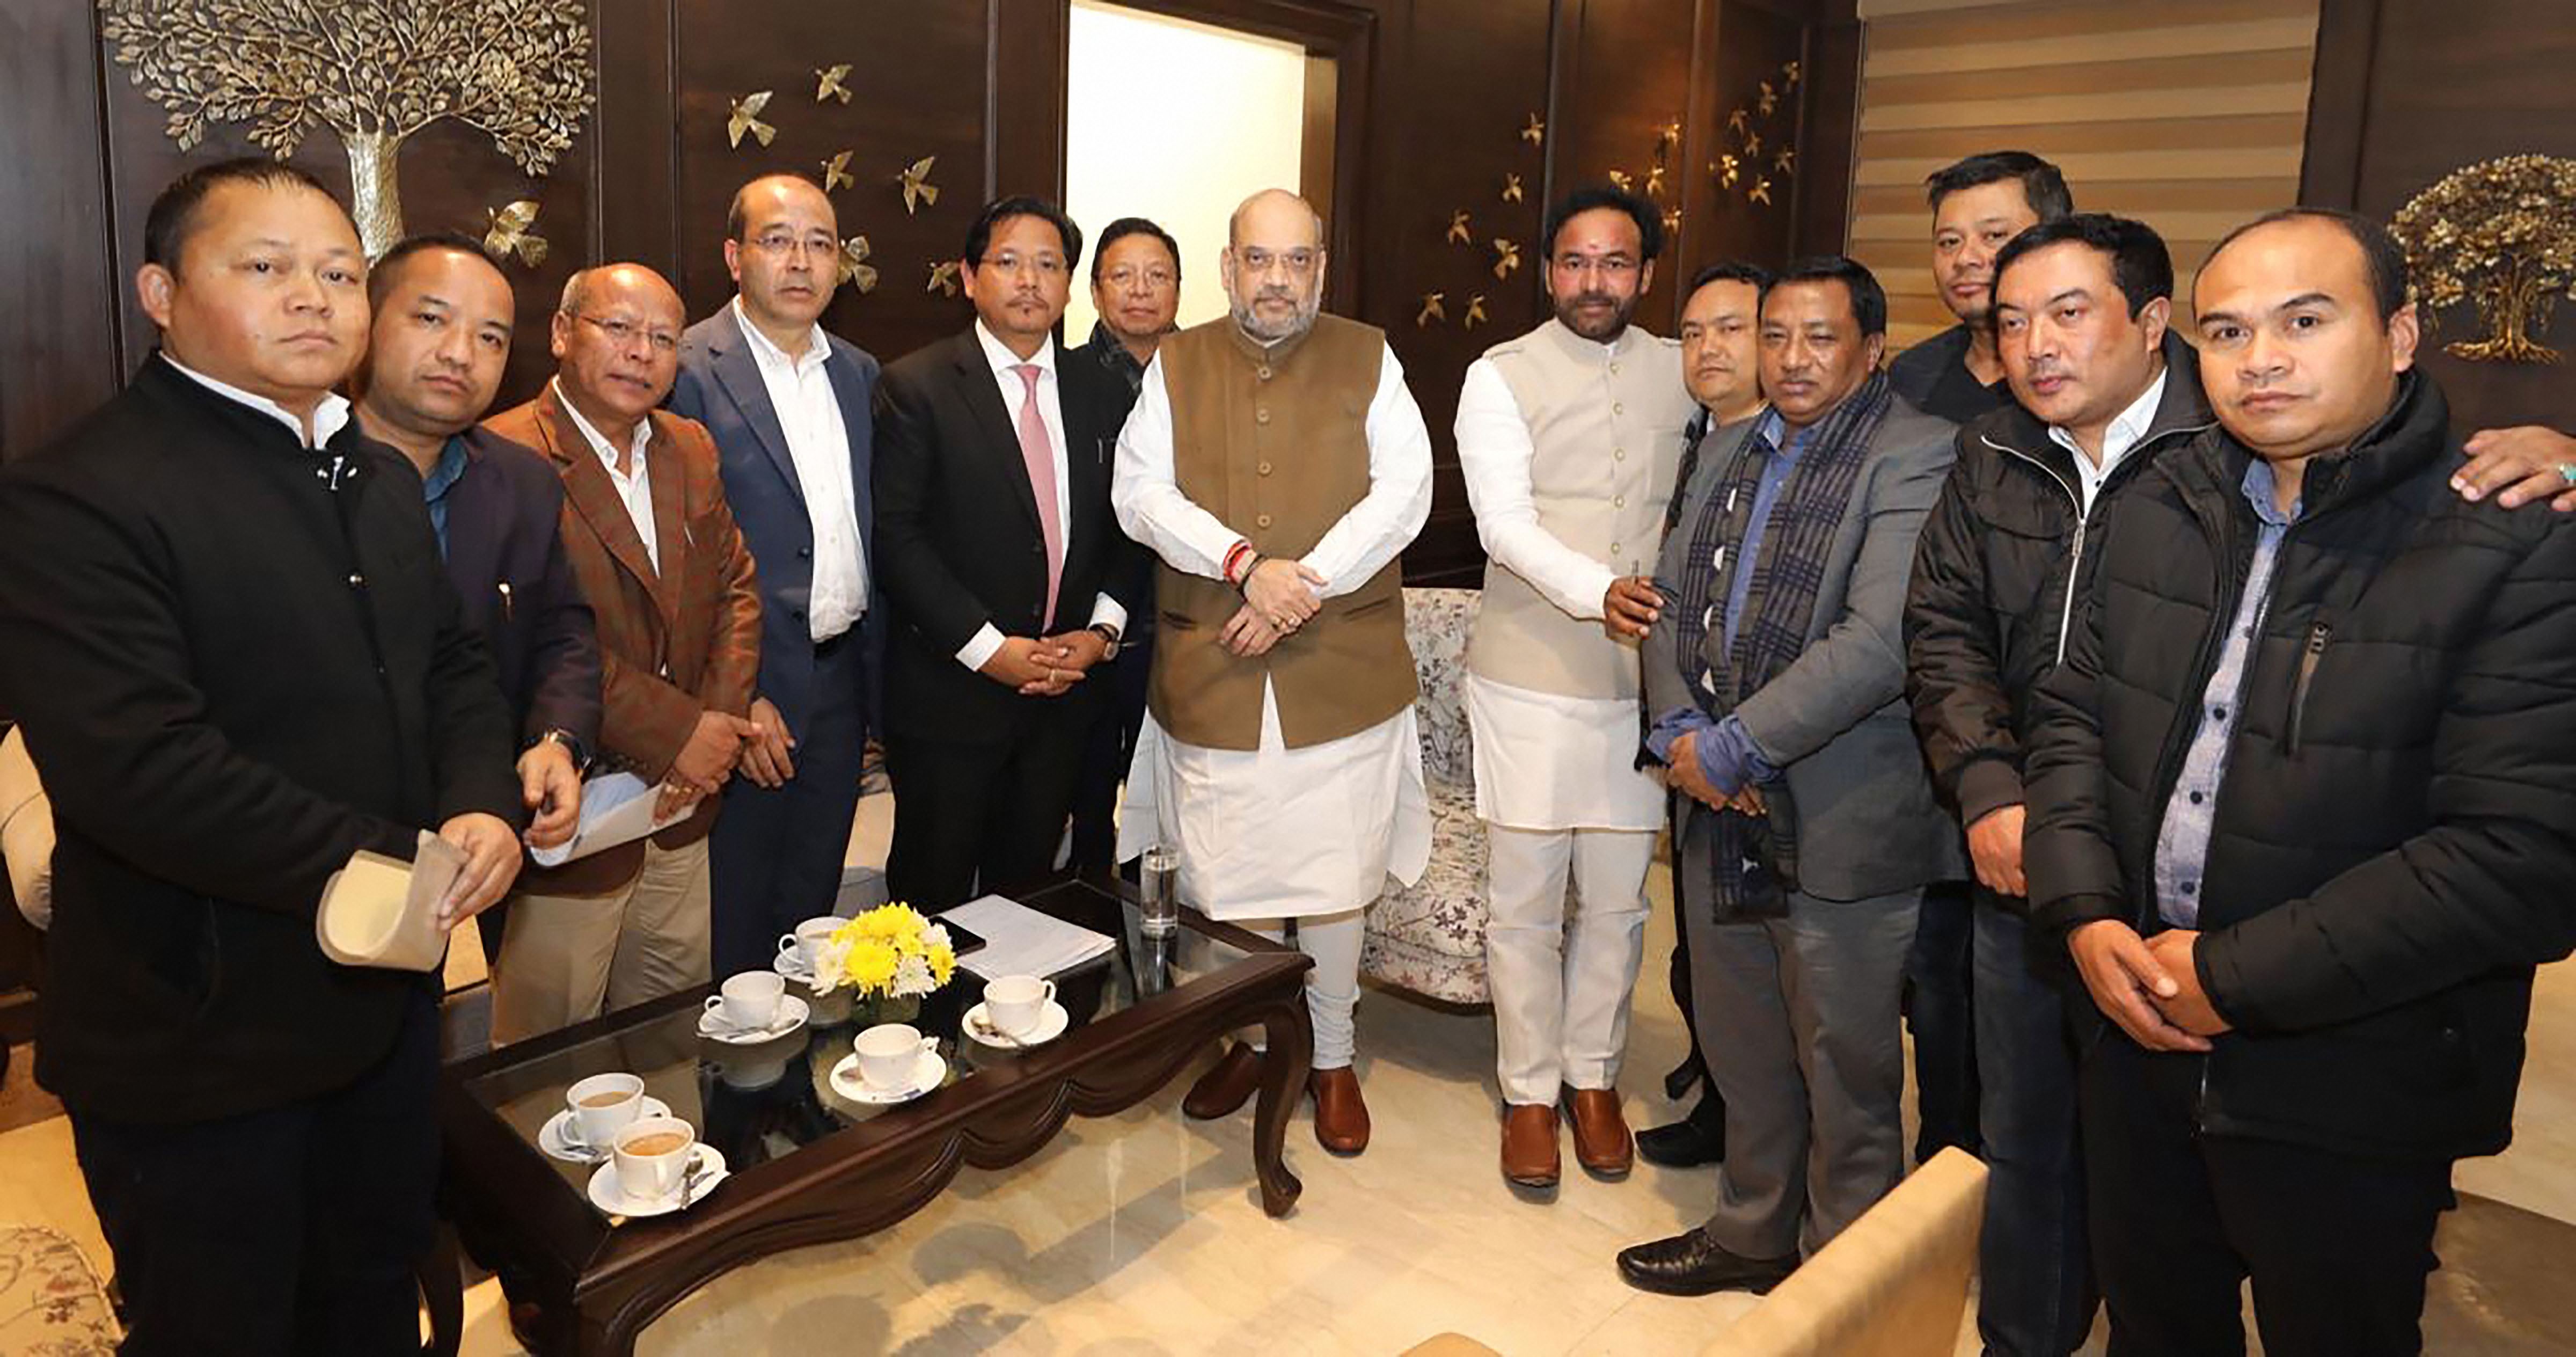 Union home minister Amit Shah in a meeting with a delegation of Meghalaya Democratic Alliance (MDA) led by its chairman and state chief minister Conrad K. Sangma, in New Delhi, Saturday, December 14, 2019.